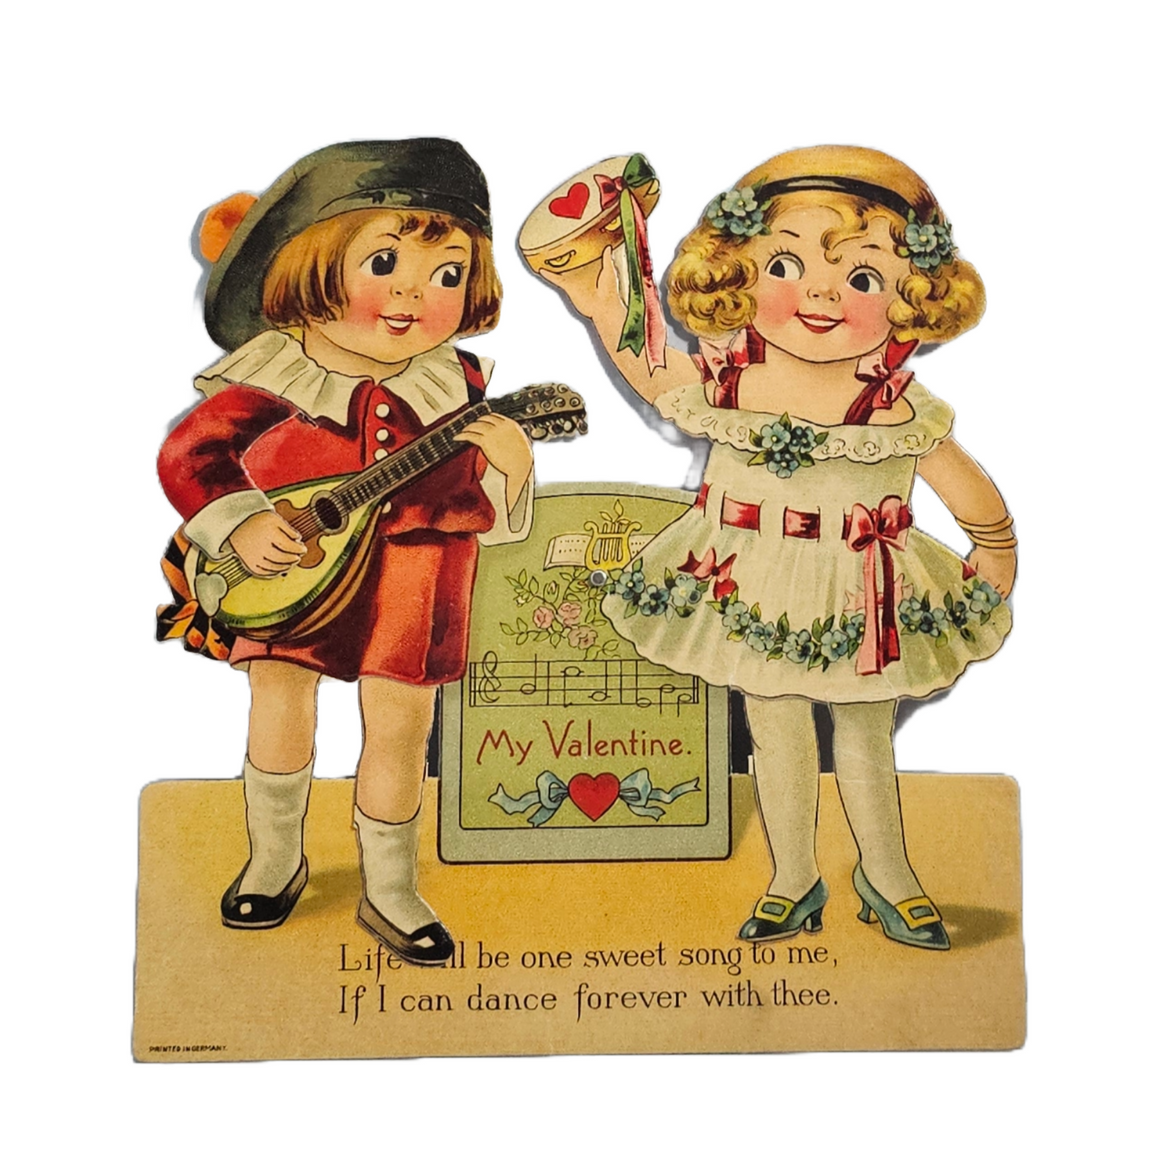 Larger Sized 7x7 Die Cut Mechanical Valentine Card Little Girl Dancing While Boy Plays Mandolin Printed in Germany